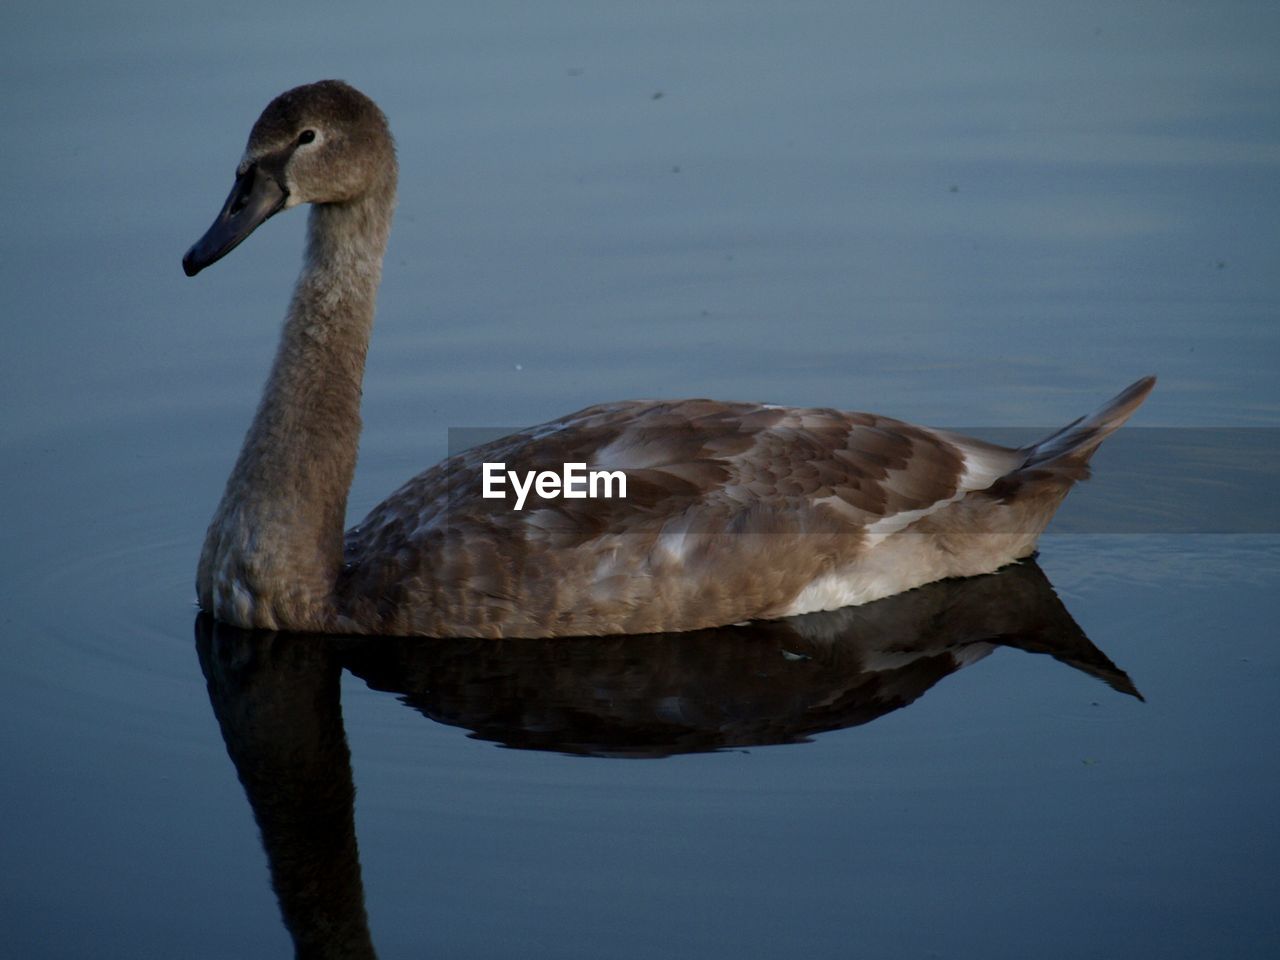 SIDE VIEW OF A DUCK IN LAKE